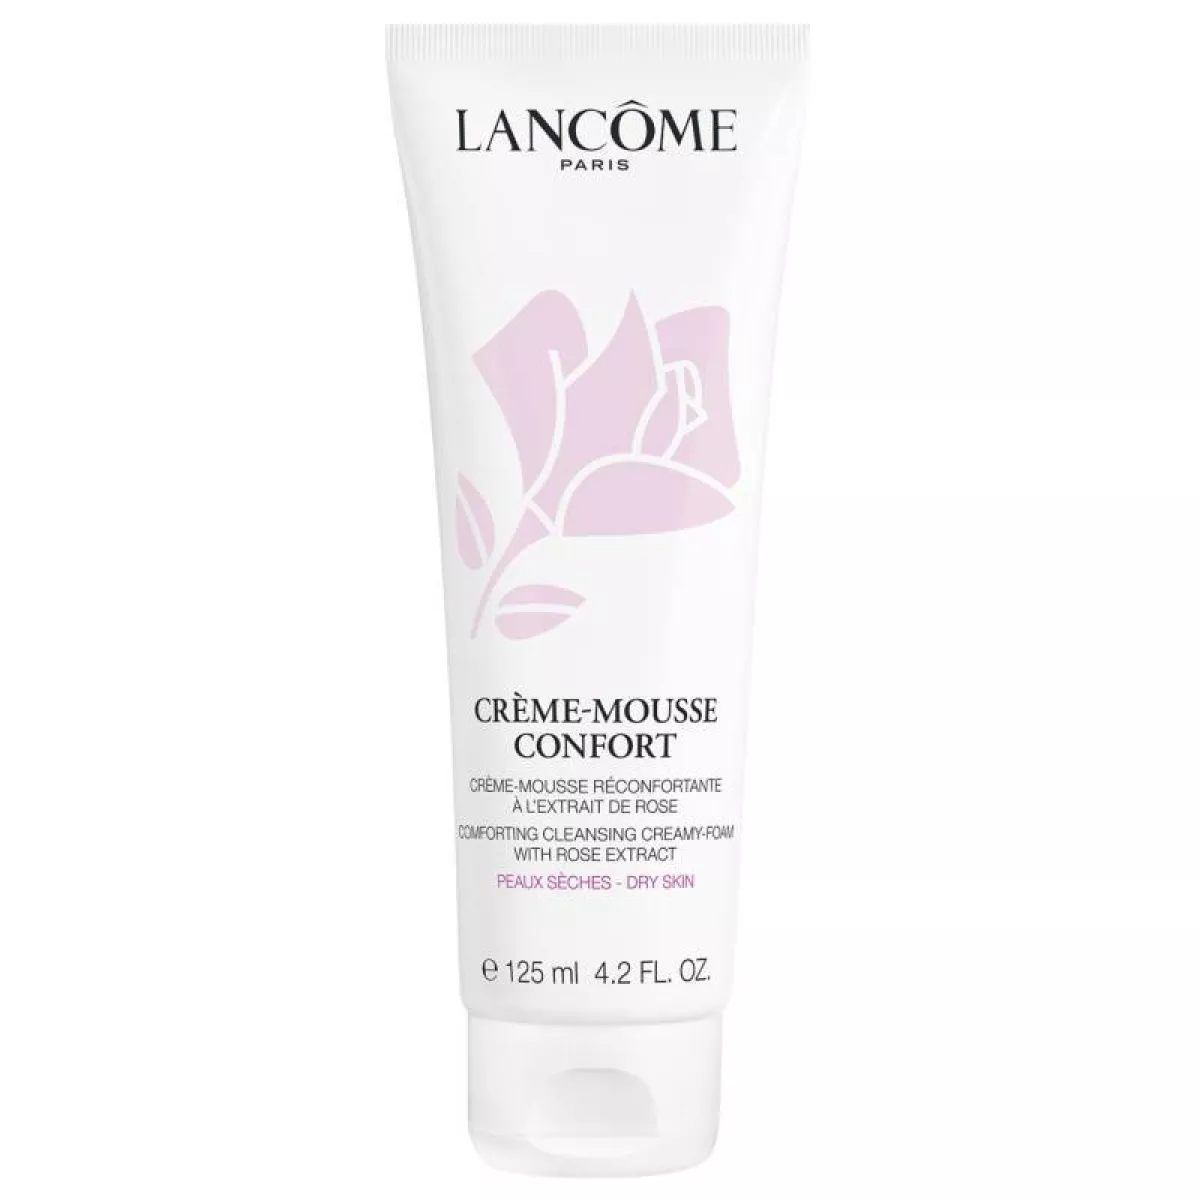 #3 - Lancome Confort Creme-Mousse Dry Skin 125 ml